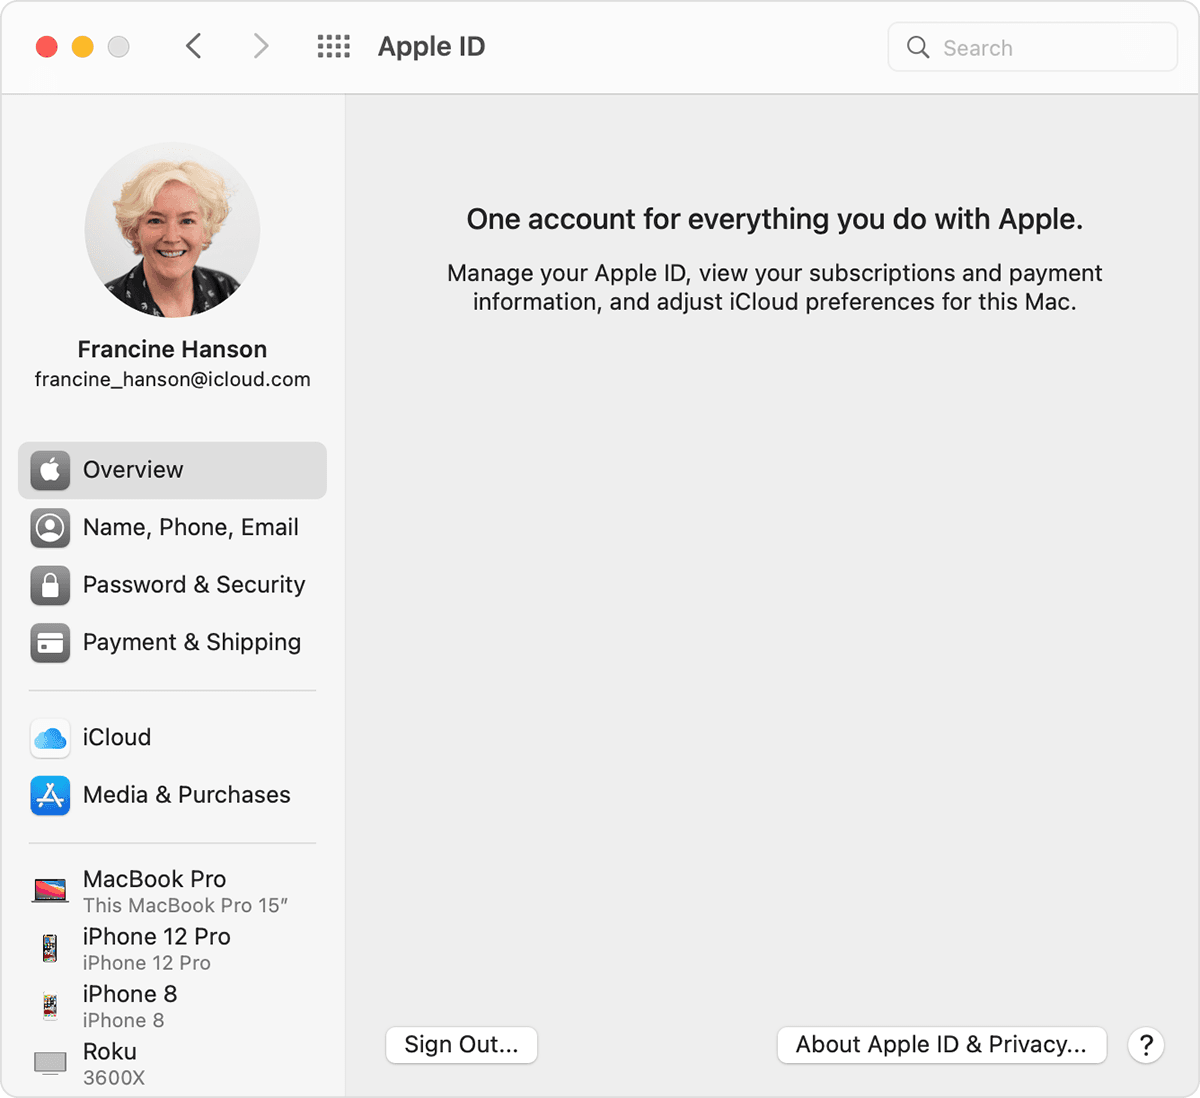 The Apple ID menu of System Preferences, showing options for a customer named Francine Hanson.